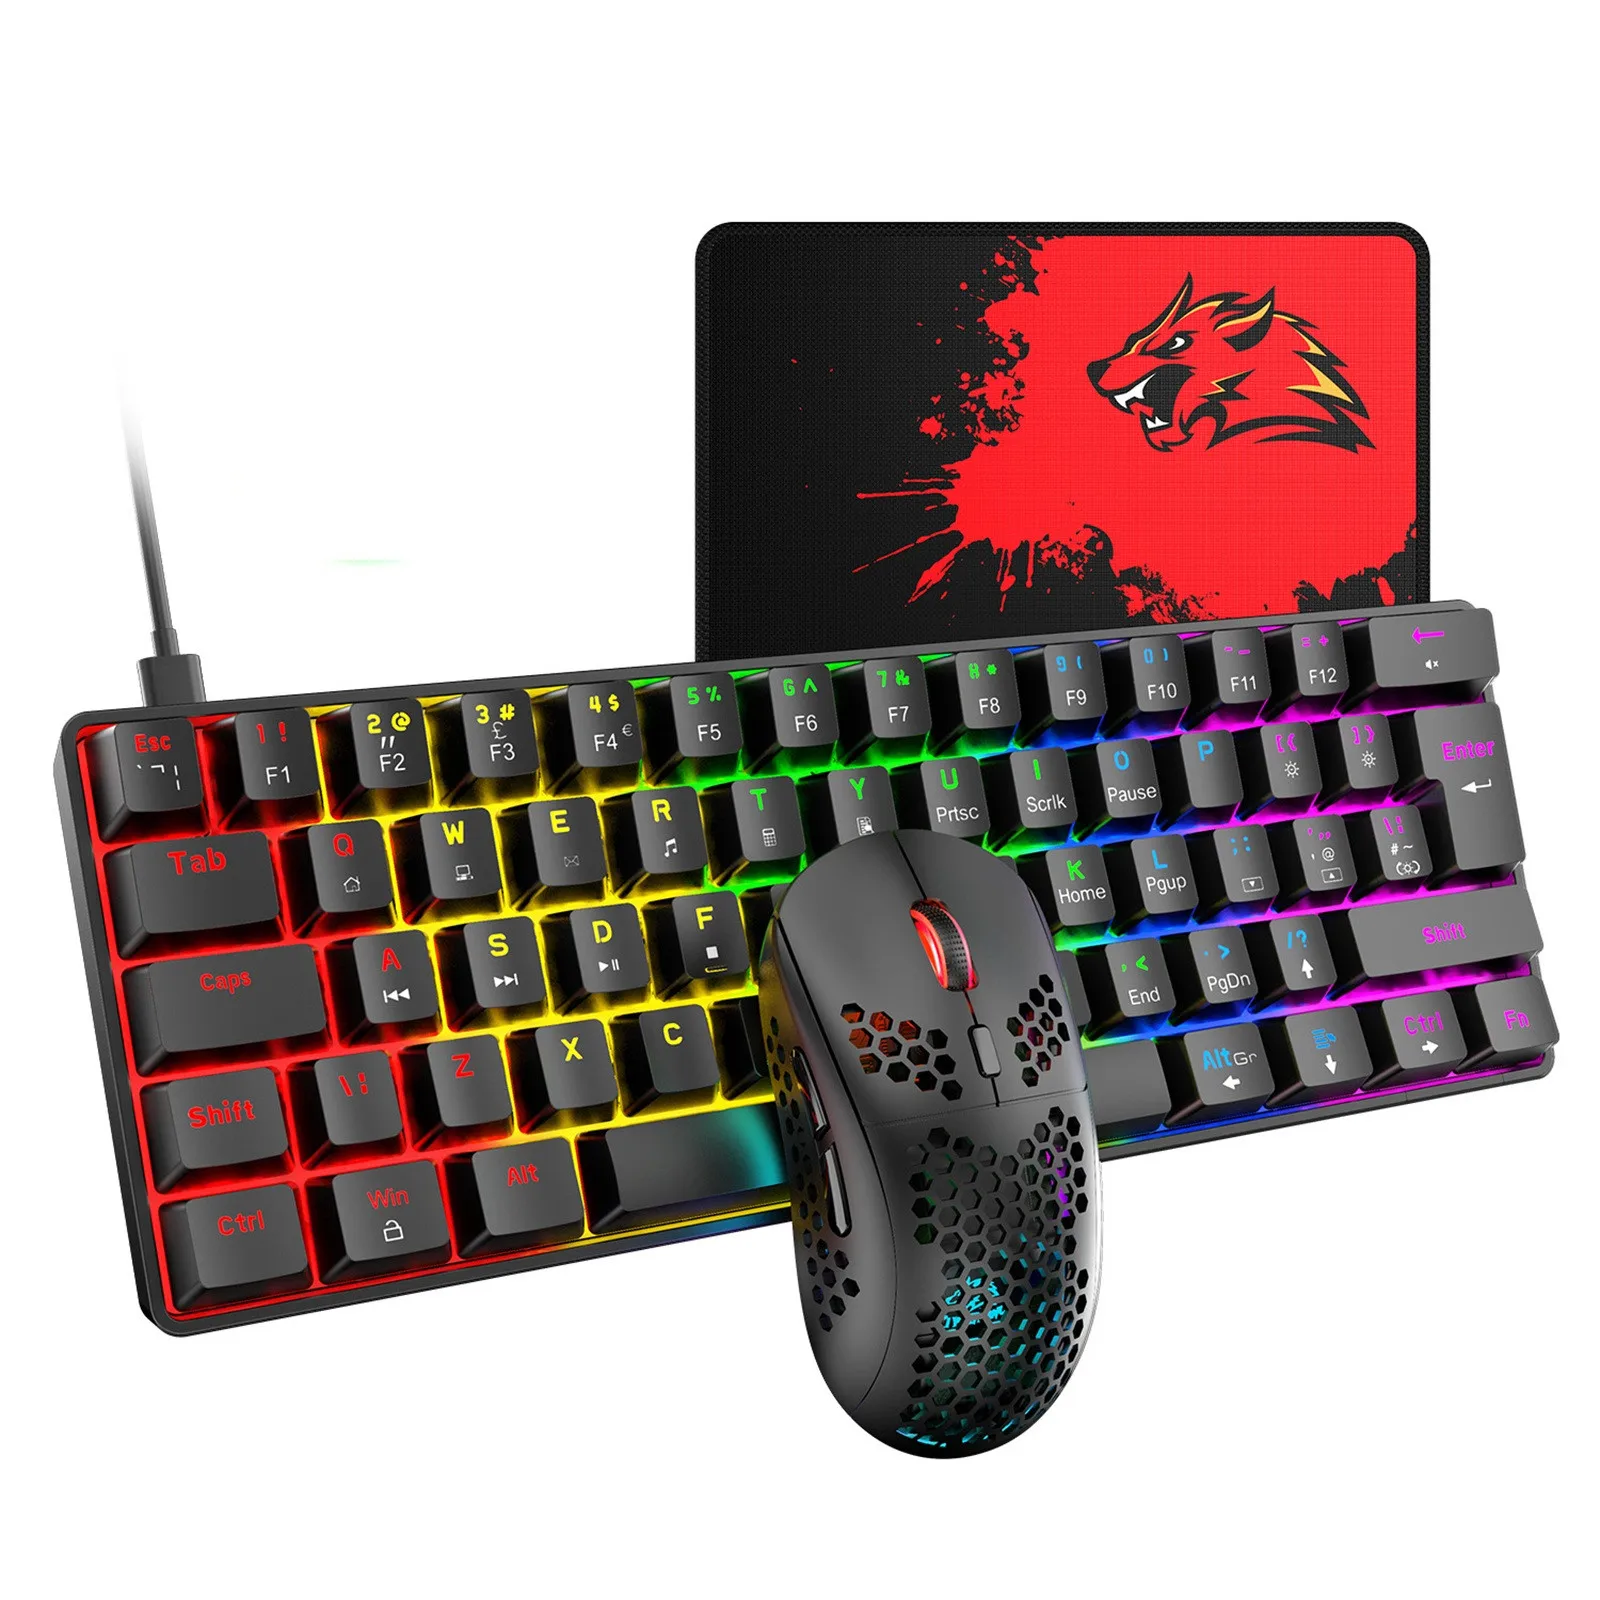 

T60 62 KeysWired Mechanical Gaming Keyboard And Mouse Combo+Mouse Pad Green Axis teclado gamer